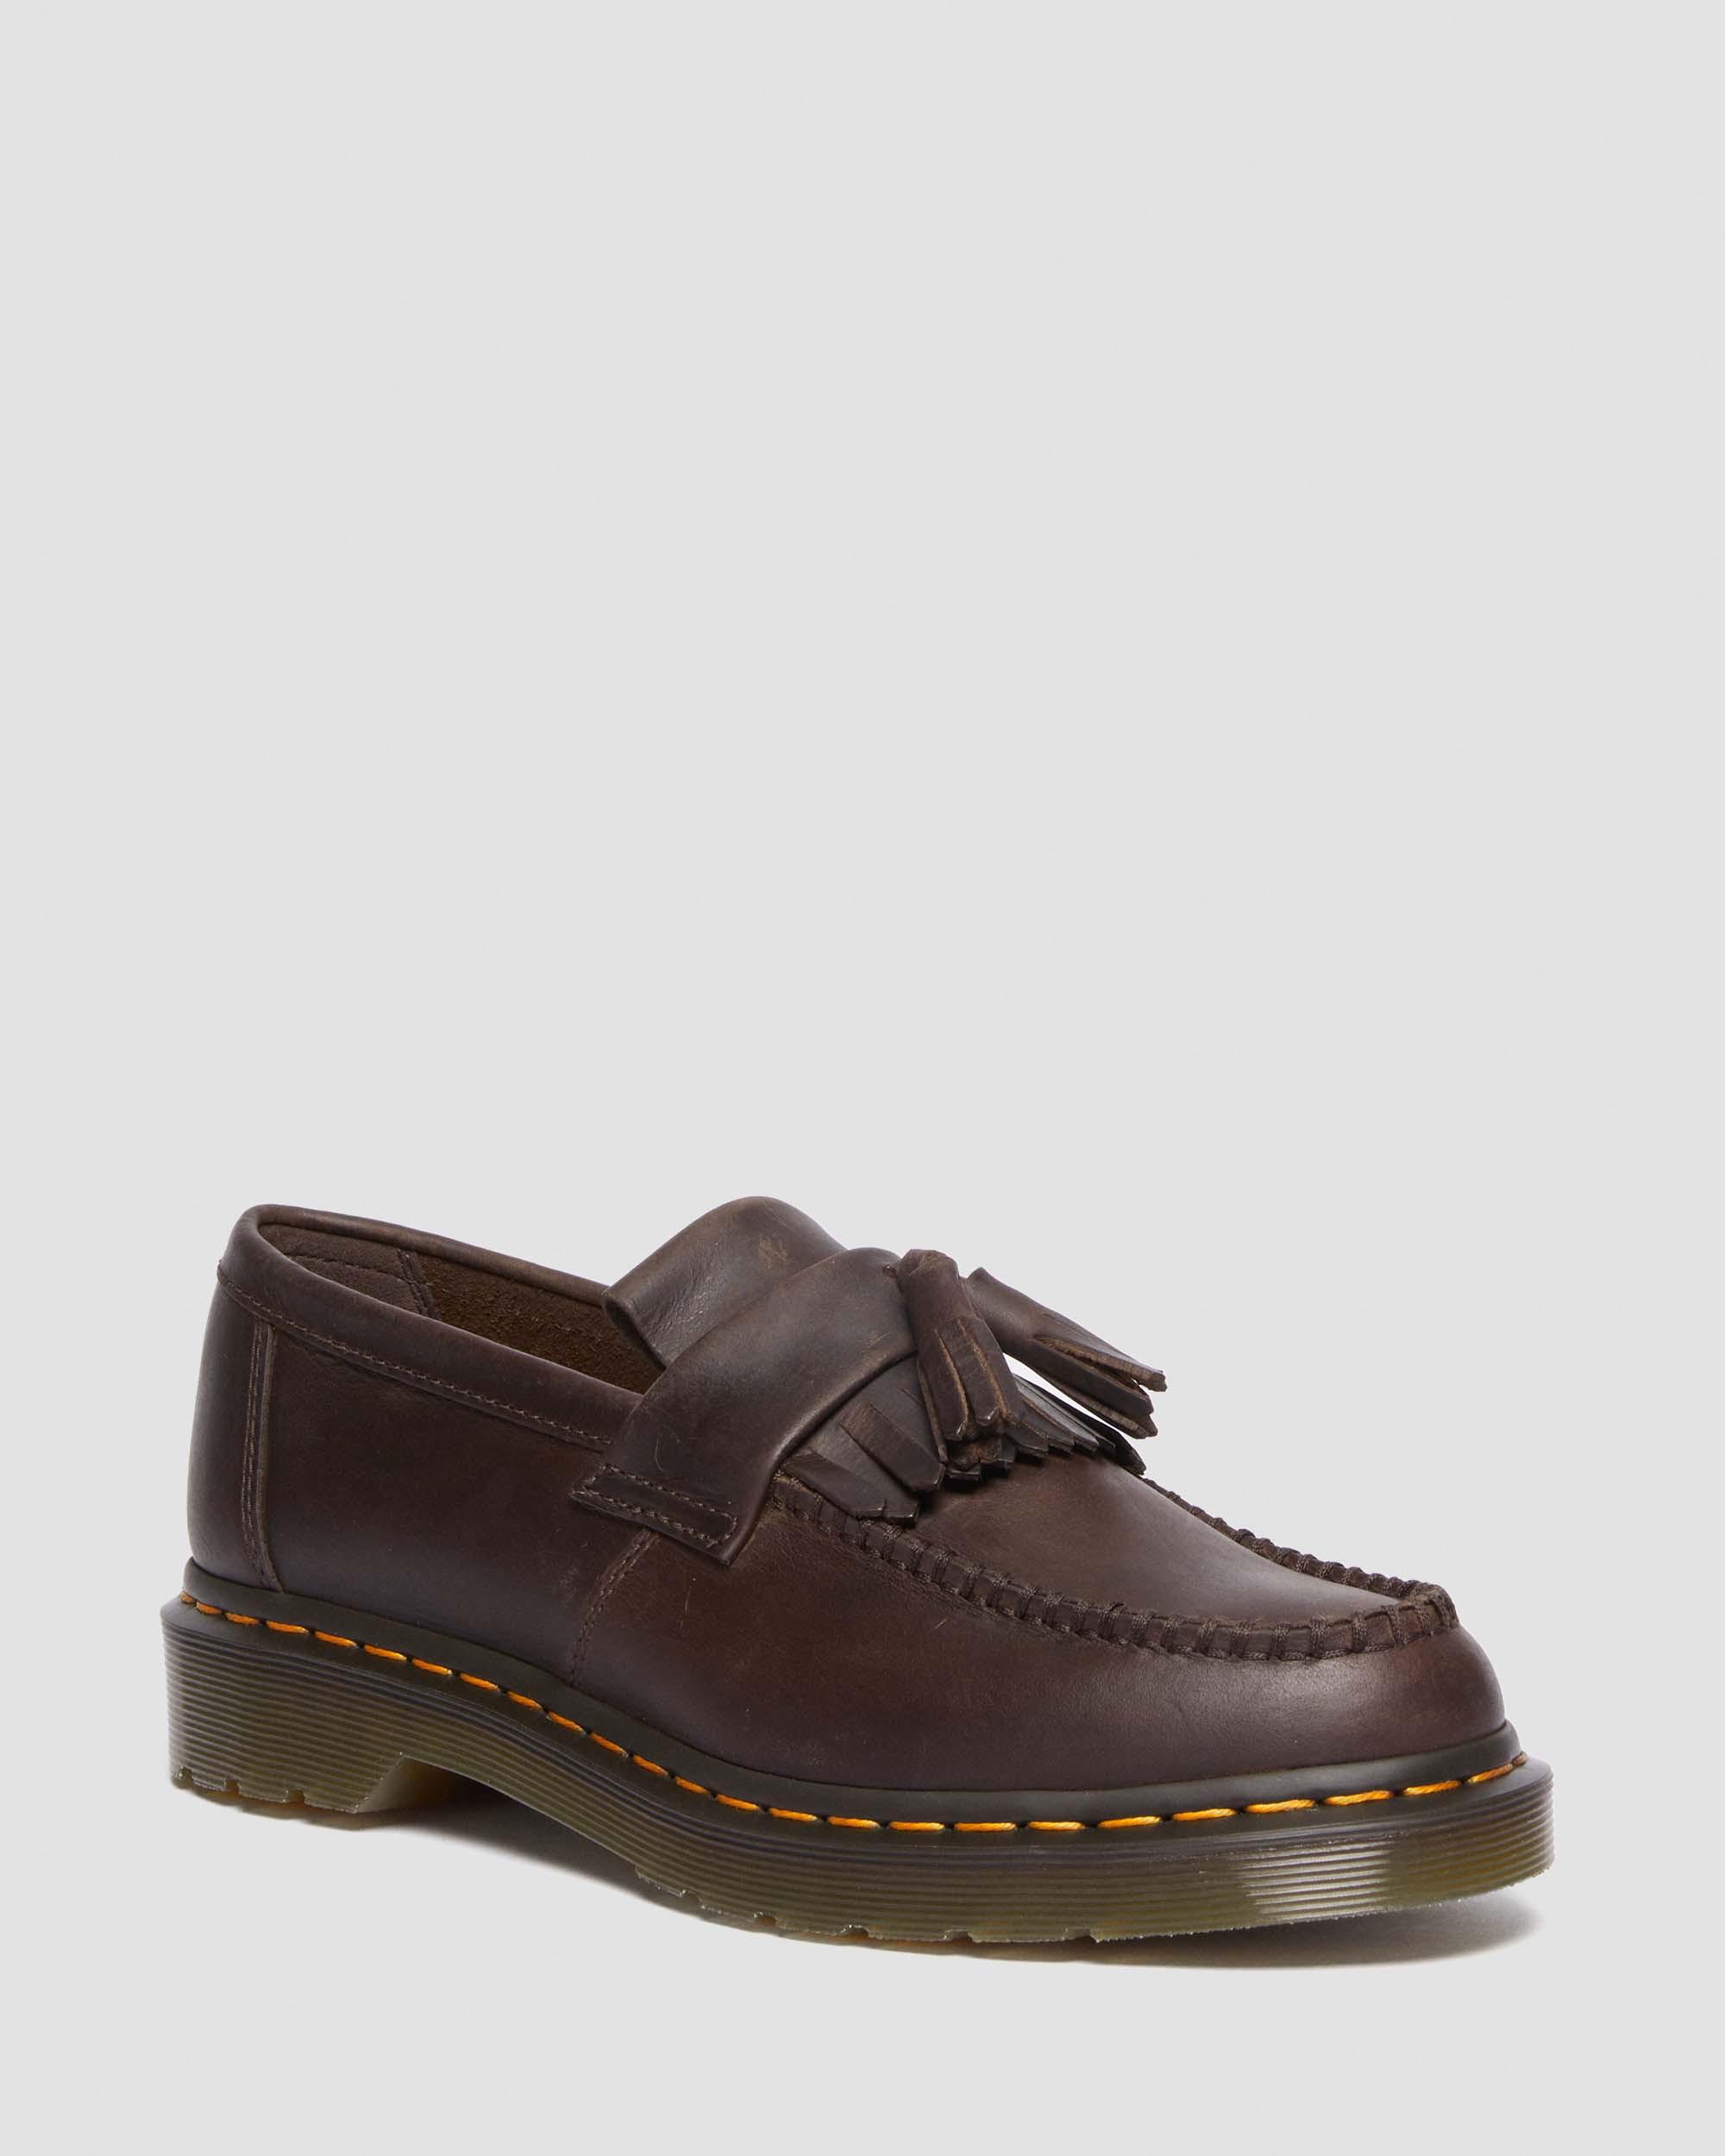 Adrian Smooth Leather Tassel Loafers in Black | Dr. Martens